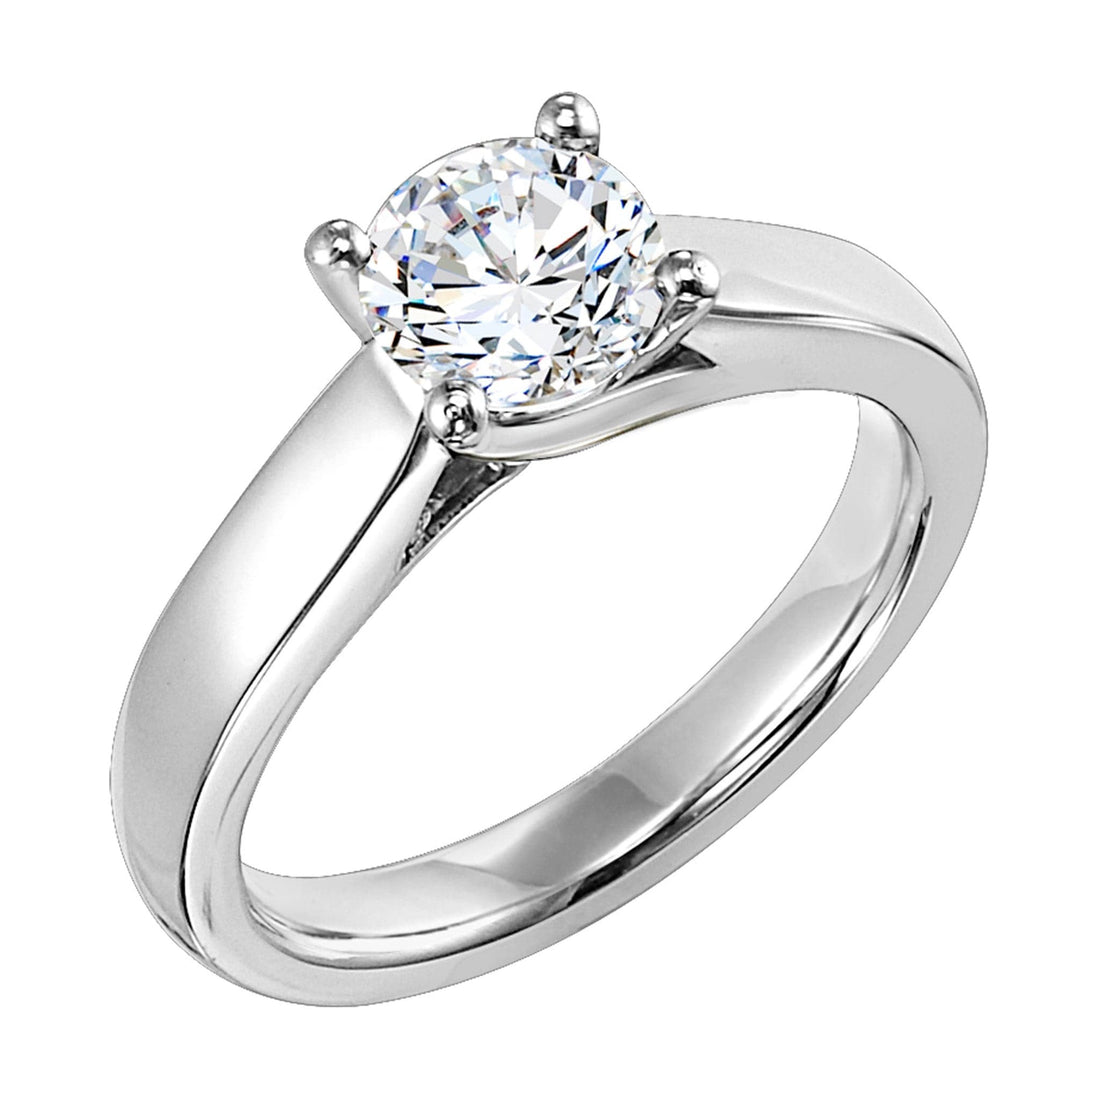 Frederick Goldman Wide Solitaire Four Prong Engagement Ring White Gold